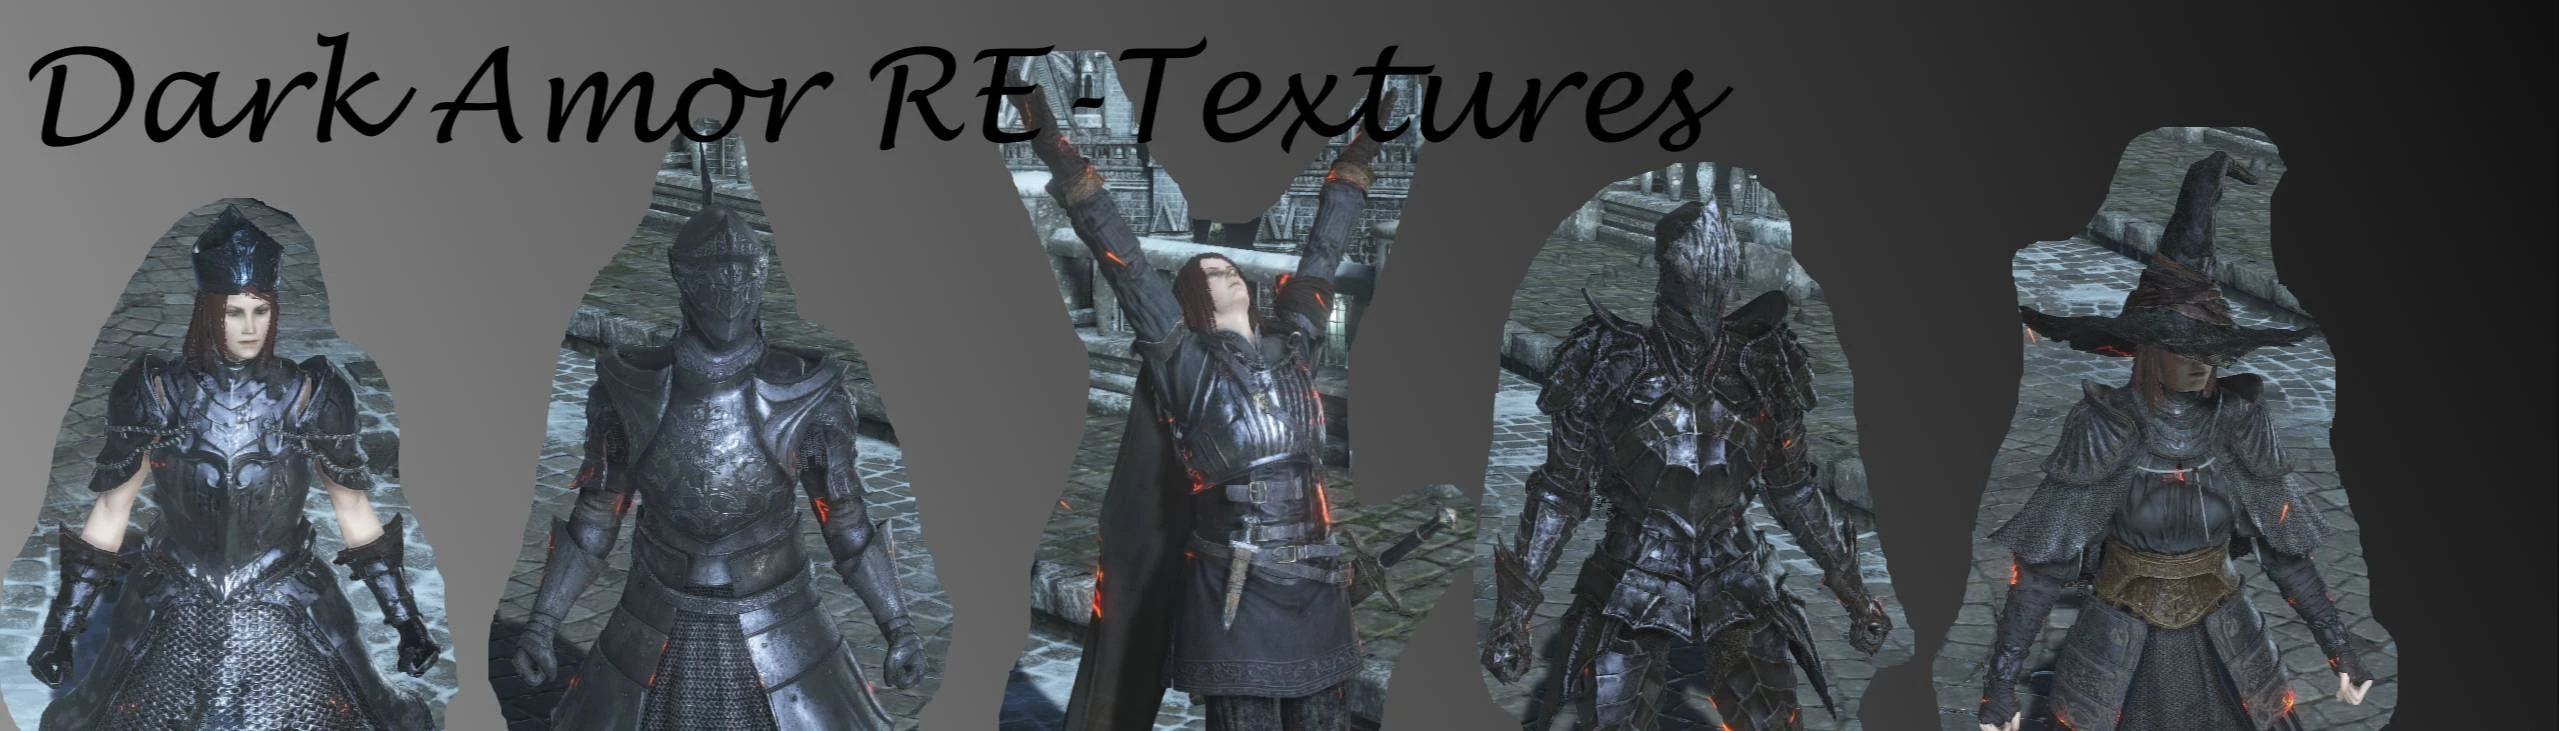 Dark Armor Re-textures for UXM and Mod Engine at Dark Souls 3